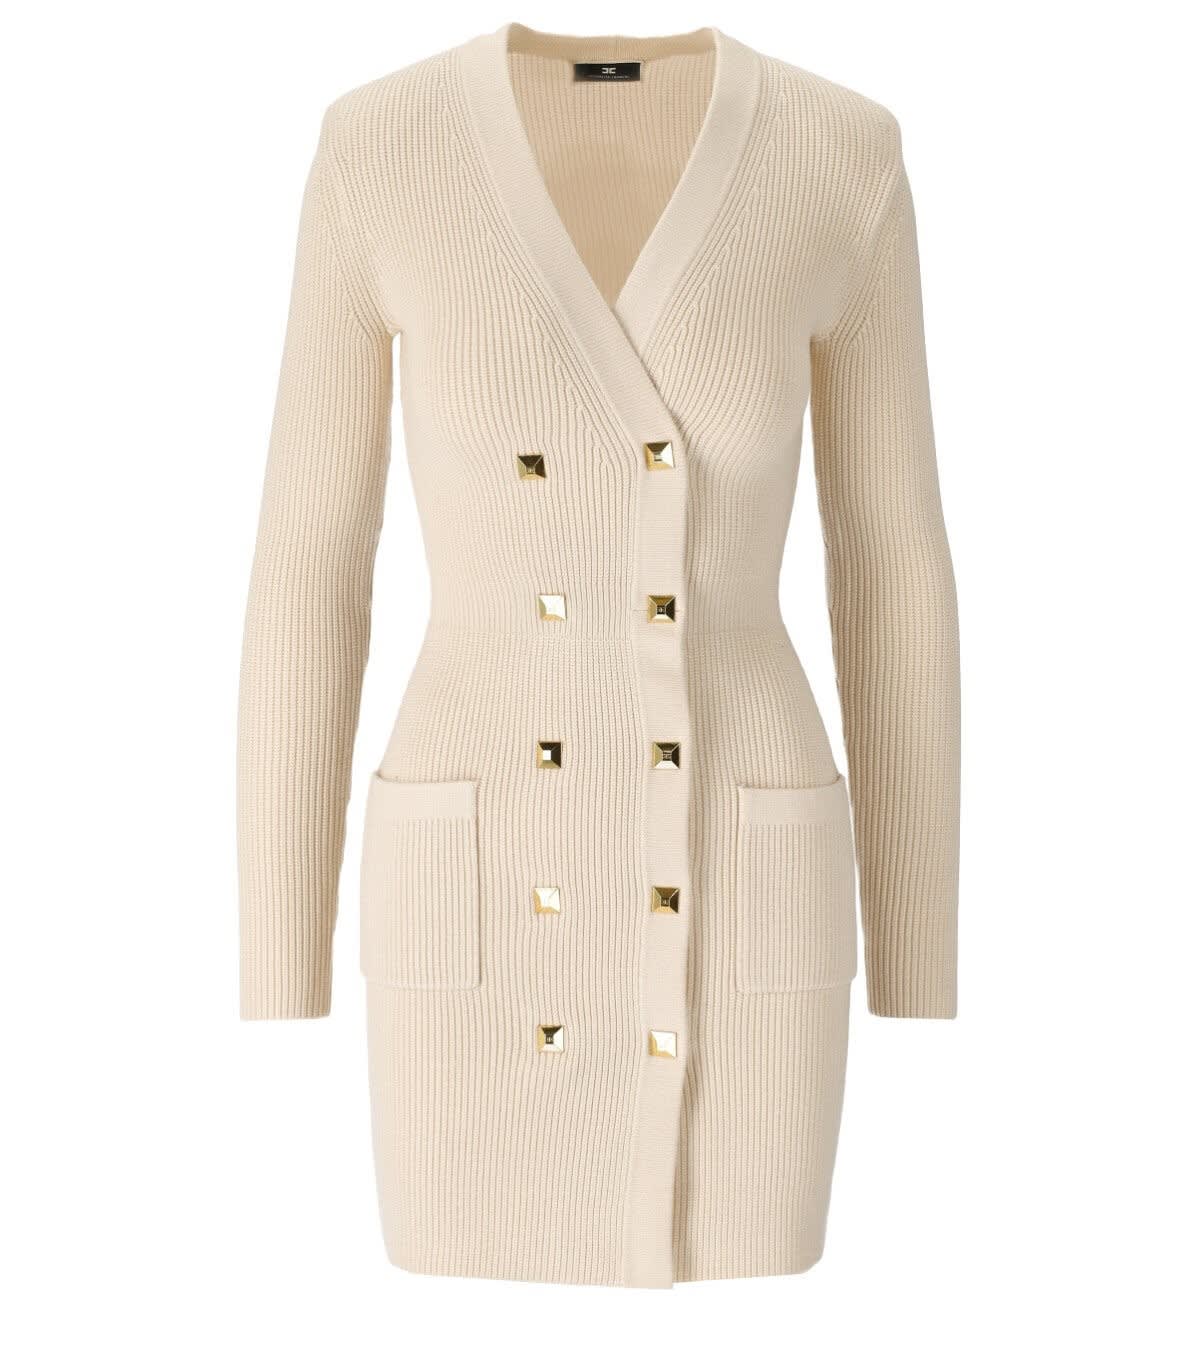 Elisabetta Franchi Butter Knitted Coat Dress With Studs